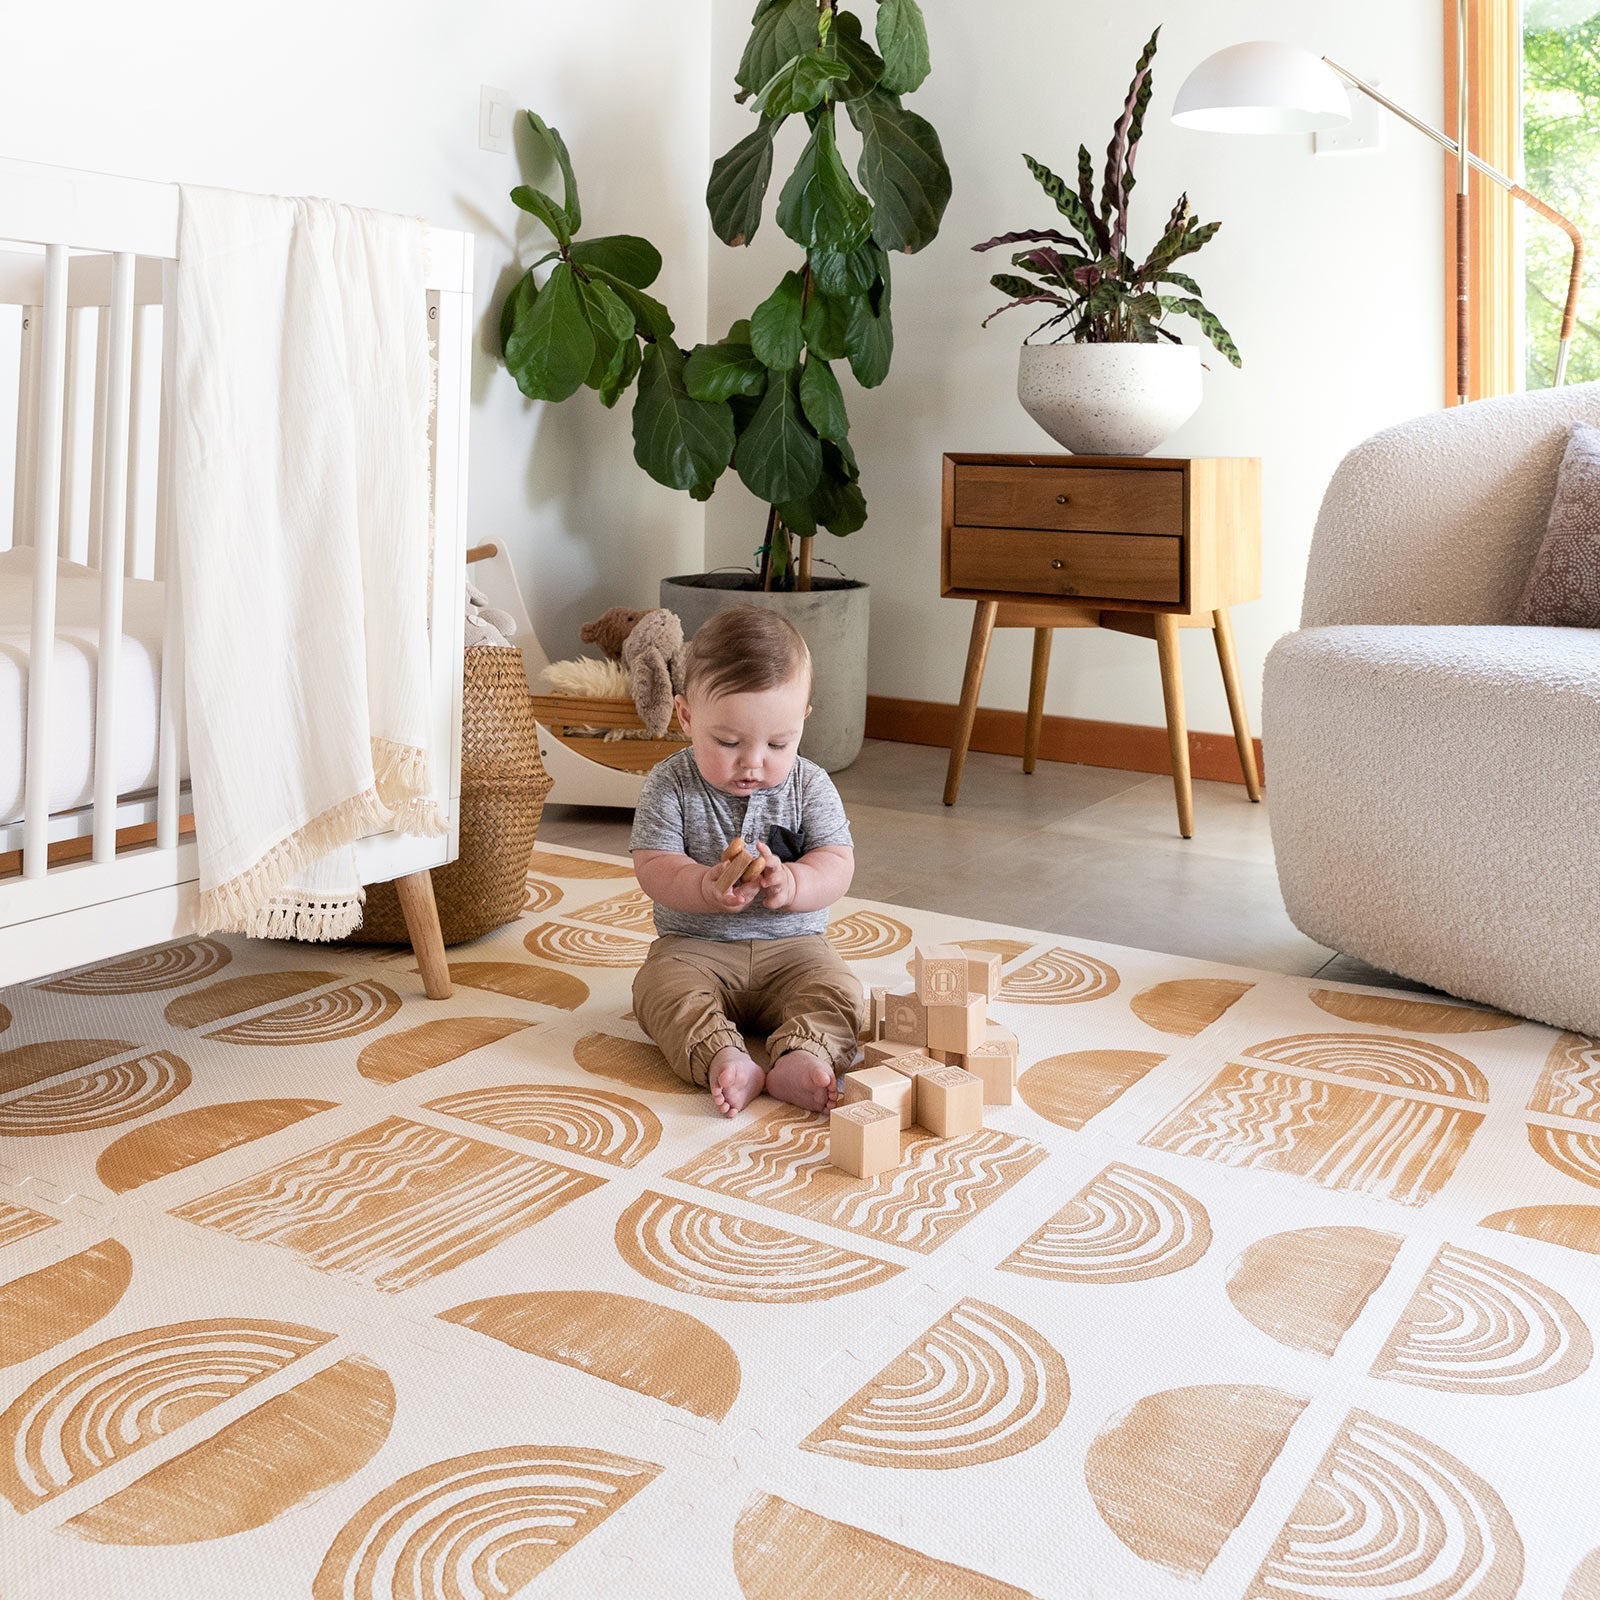 Ada modern minimalist baby play mat in Sunflower, mustard yellow and off white. Shown in a nursery with baby playing with blocks.